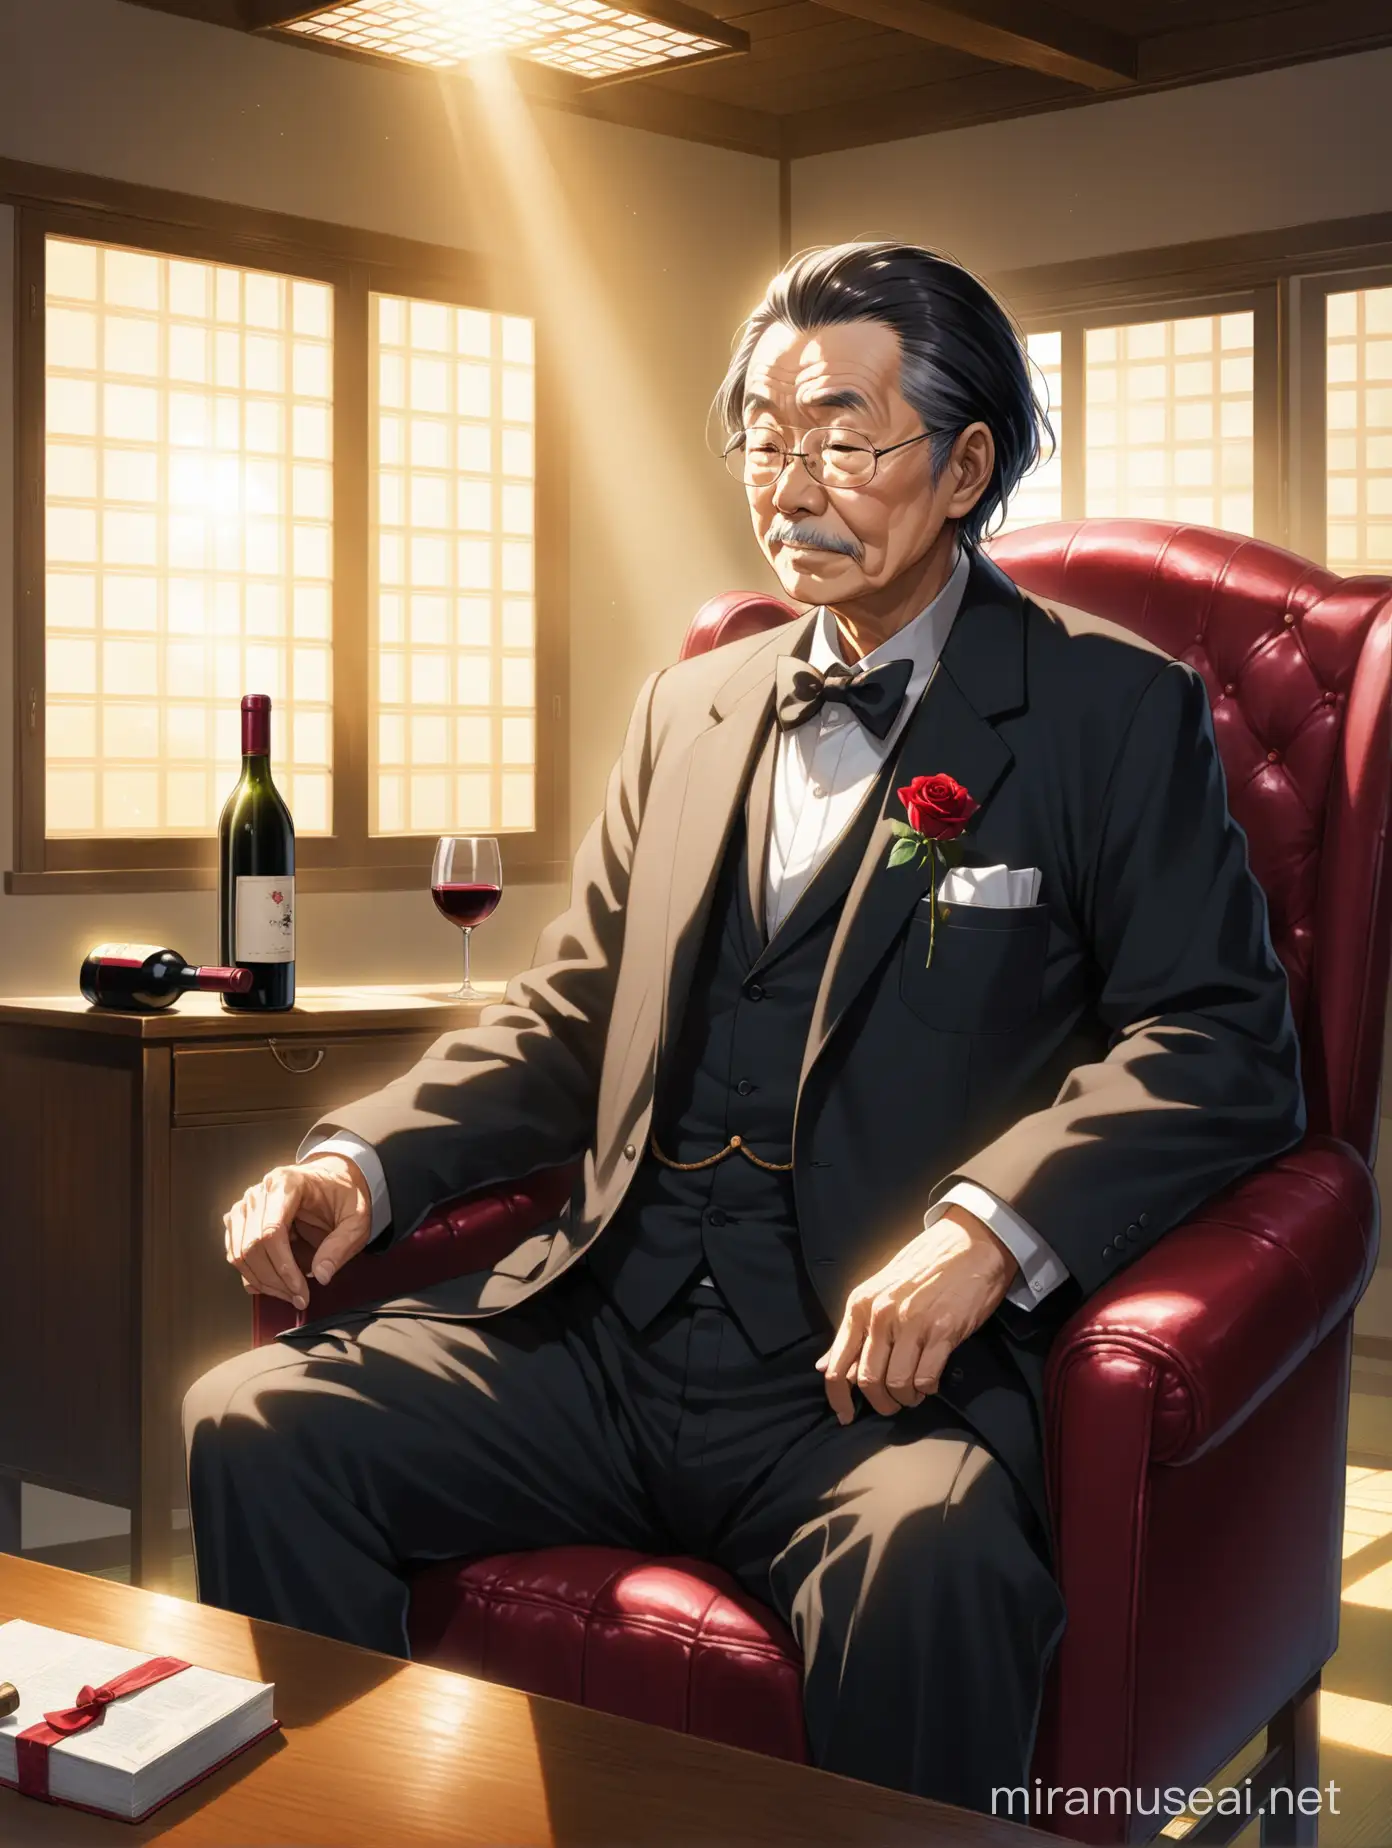 Wise Japanese Gentleman with Red Rose in Sunlit Room